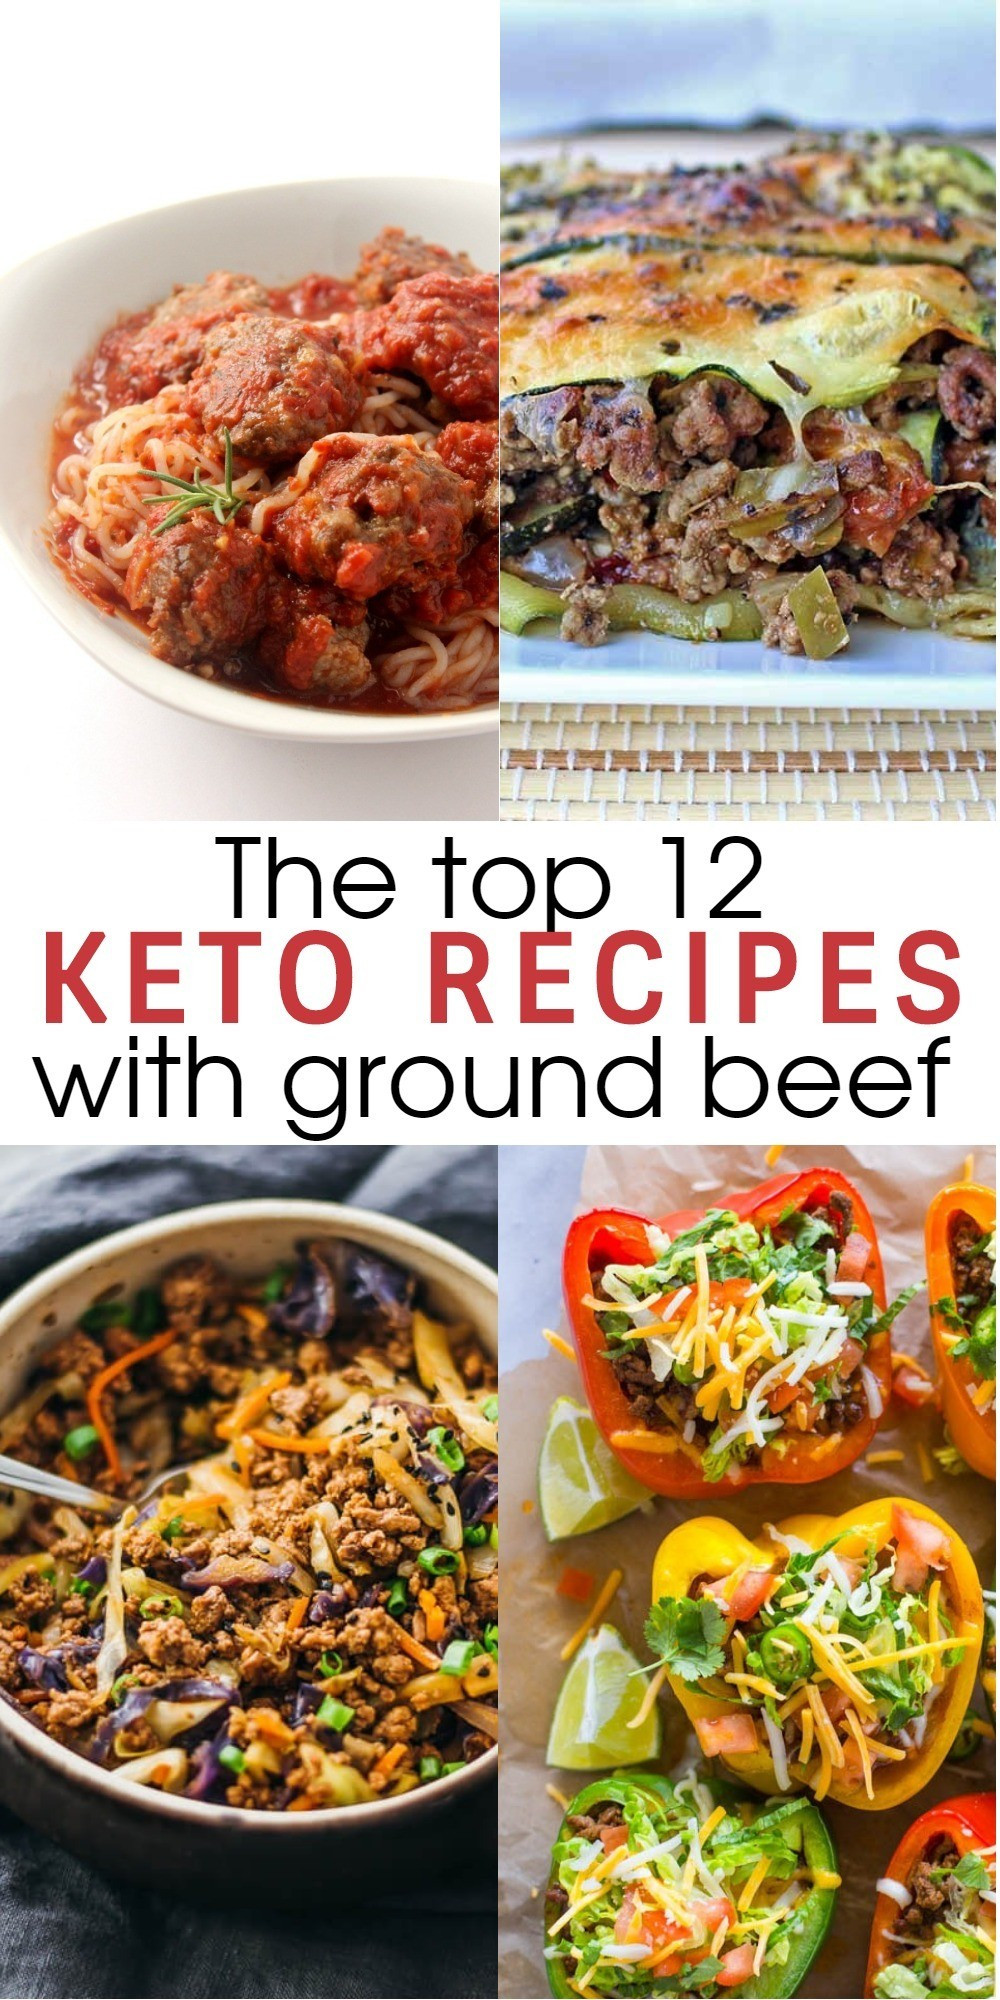 Easy Keto Ground Beef Recipes
 12 Flavorful and Easy Keto Recipes With Ground Beef To Try